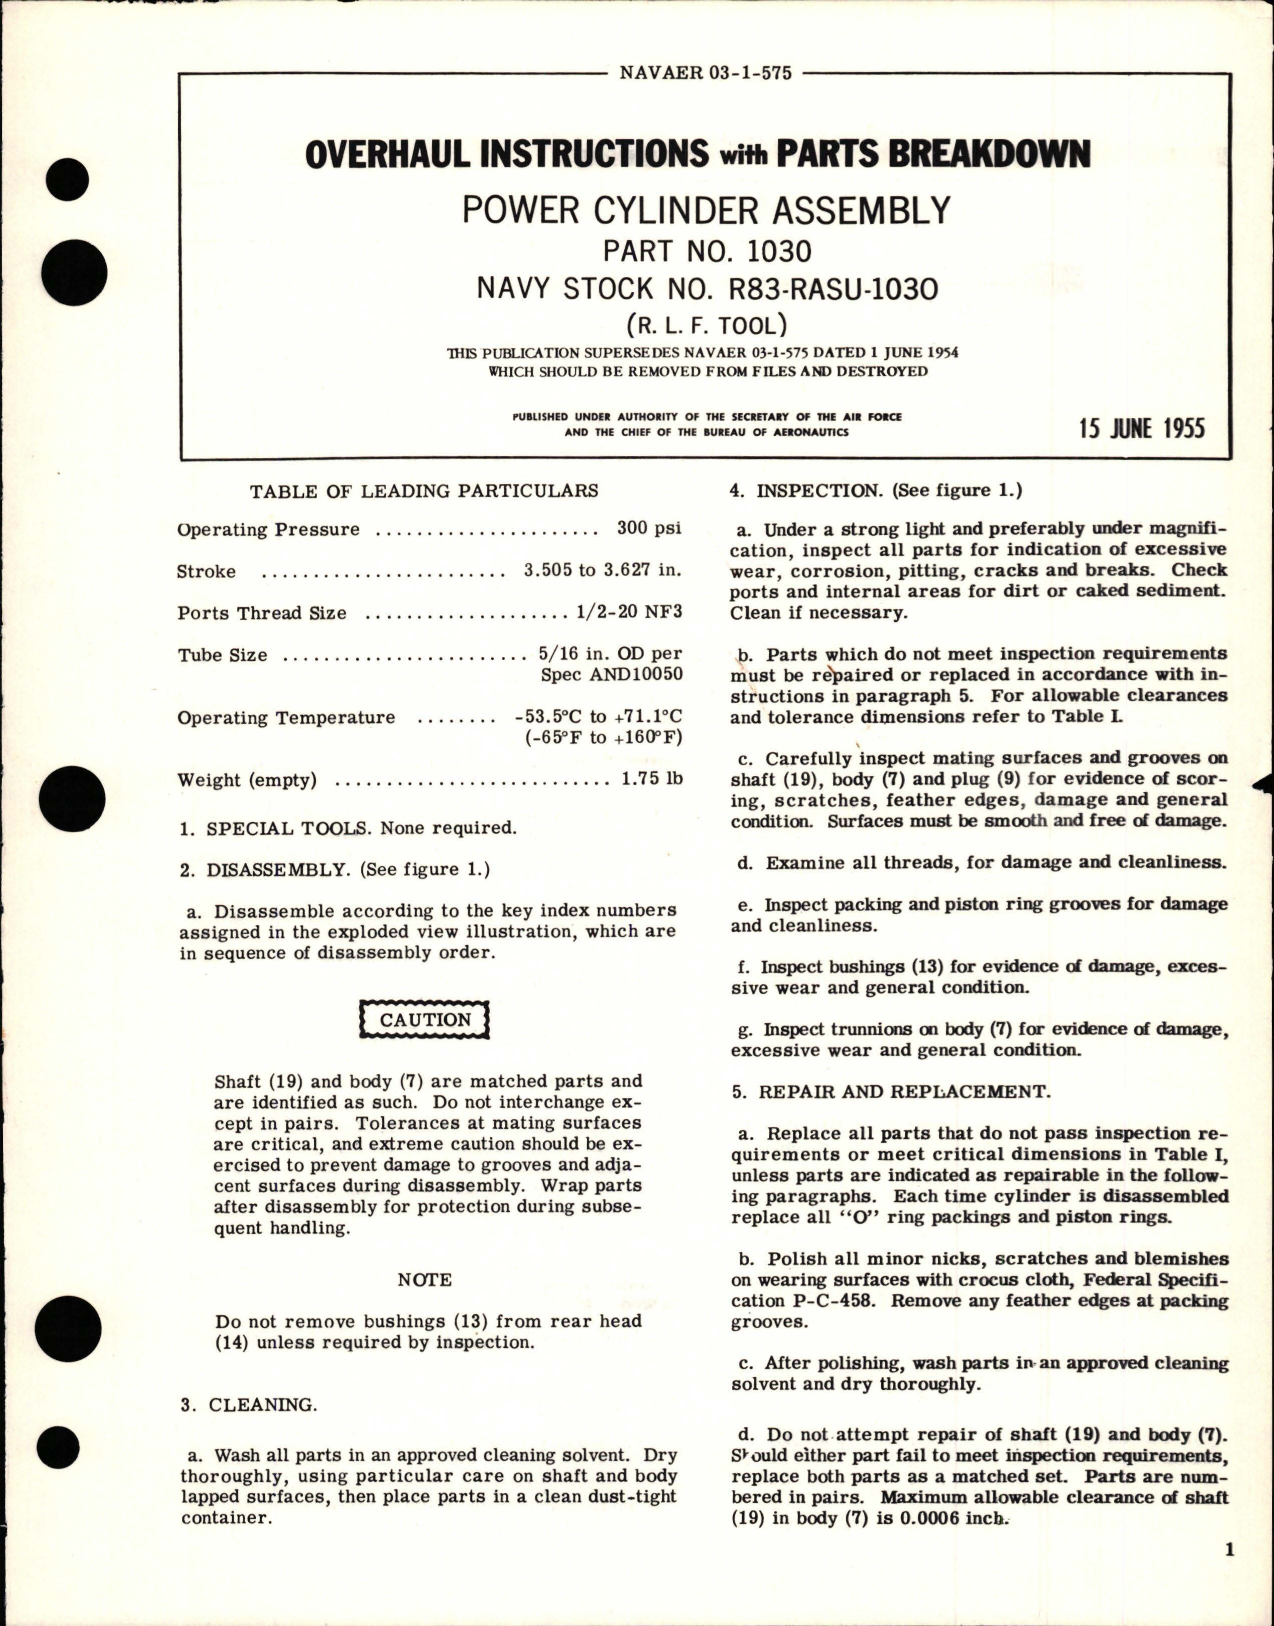 Sample page 1 from AirCorps Library document: Overhaul Instructions with Parts Breakdown for Power Cylinder Assembly - Part 1030